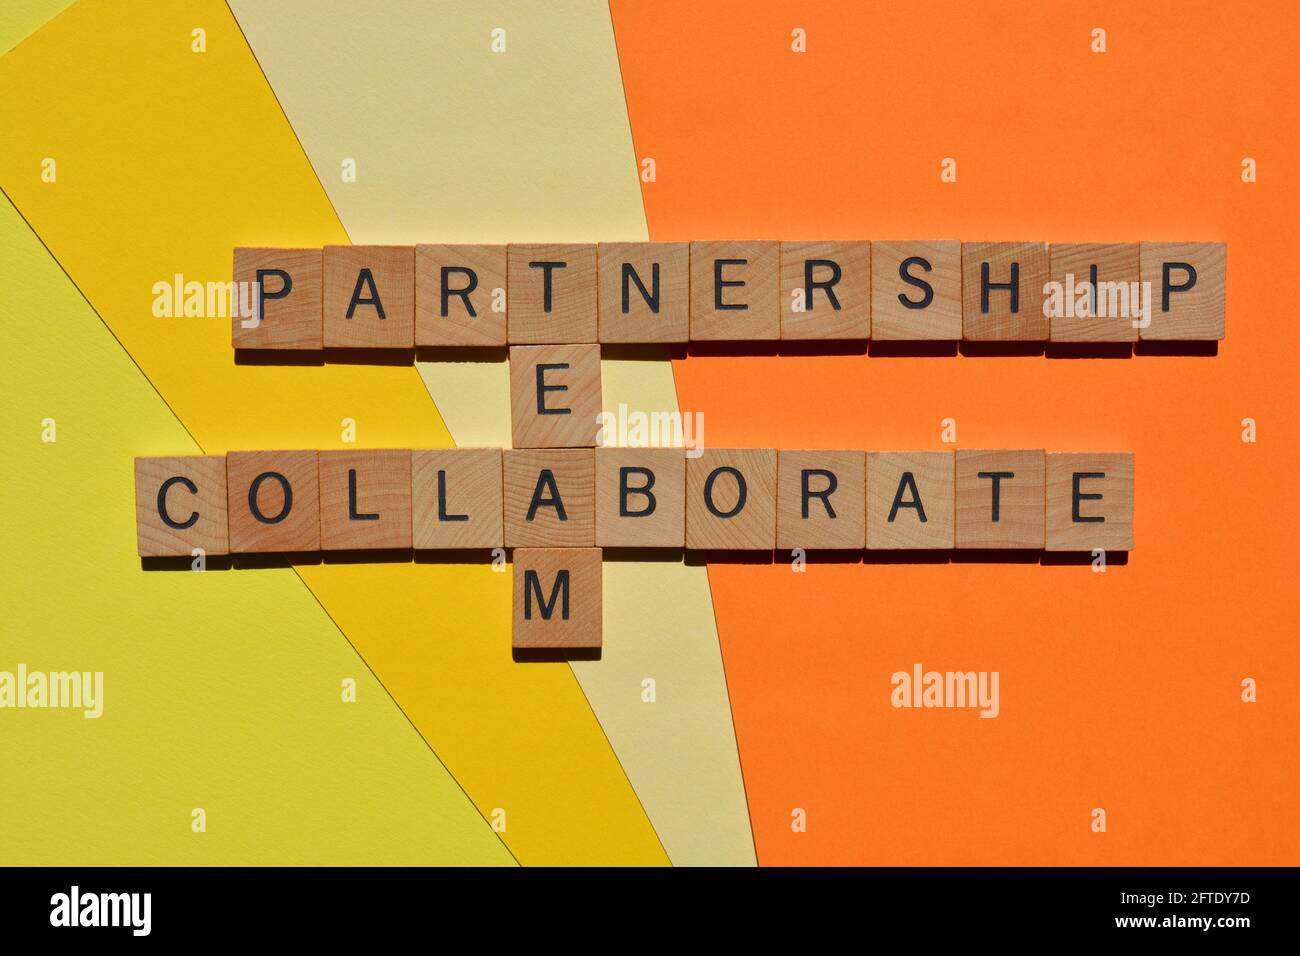 Partnership, Team, Collaborate, words in wooden alphabet letters in crossword form Stock Photo